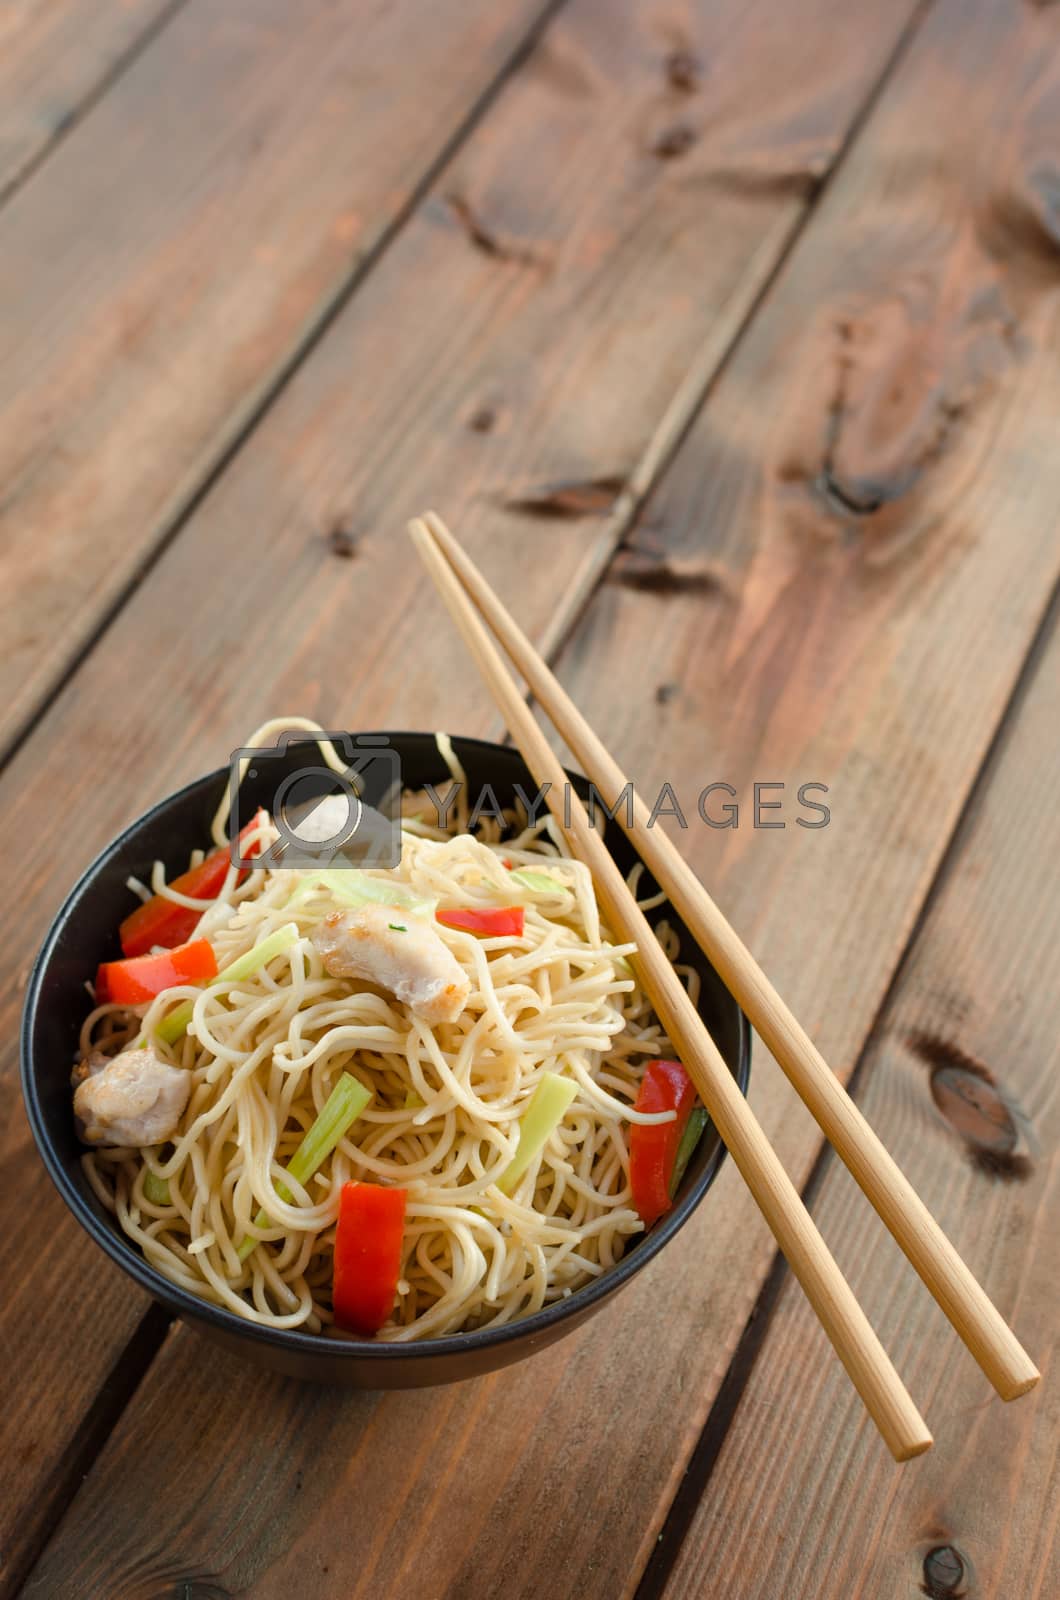 Royalty free image of Chinese noodles by Peteer